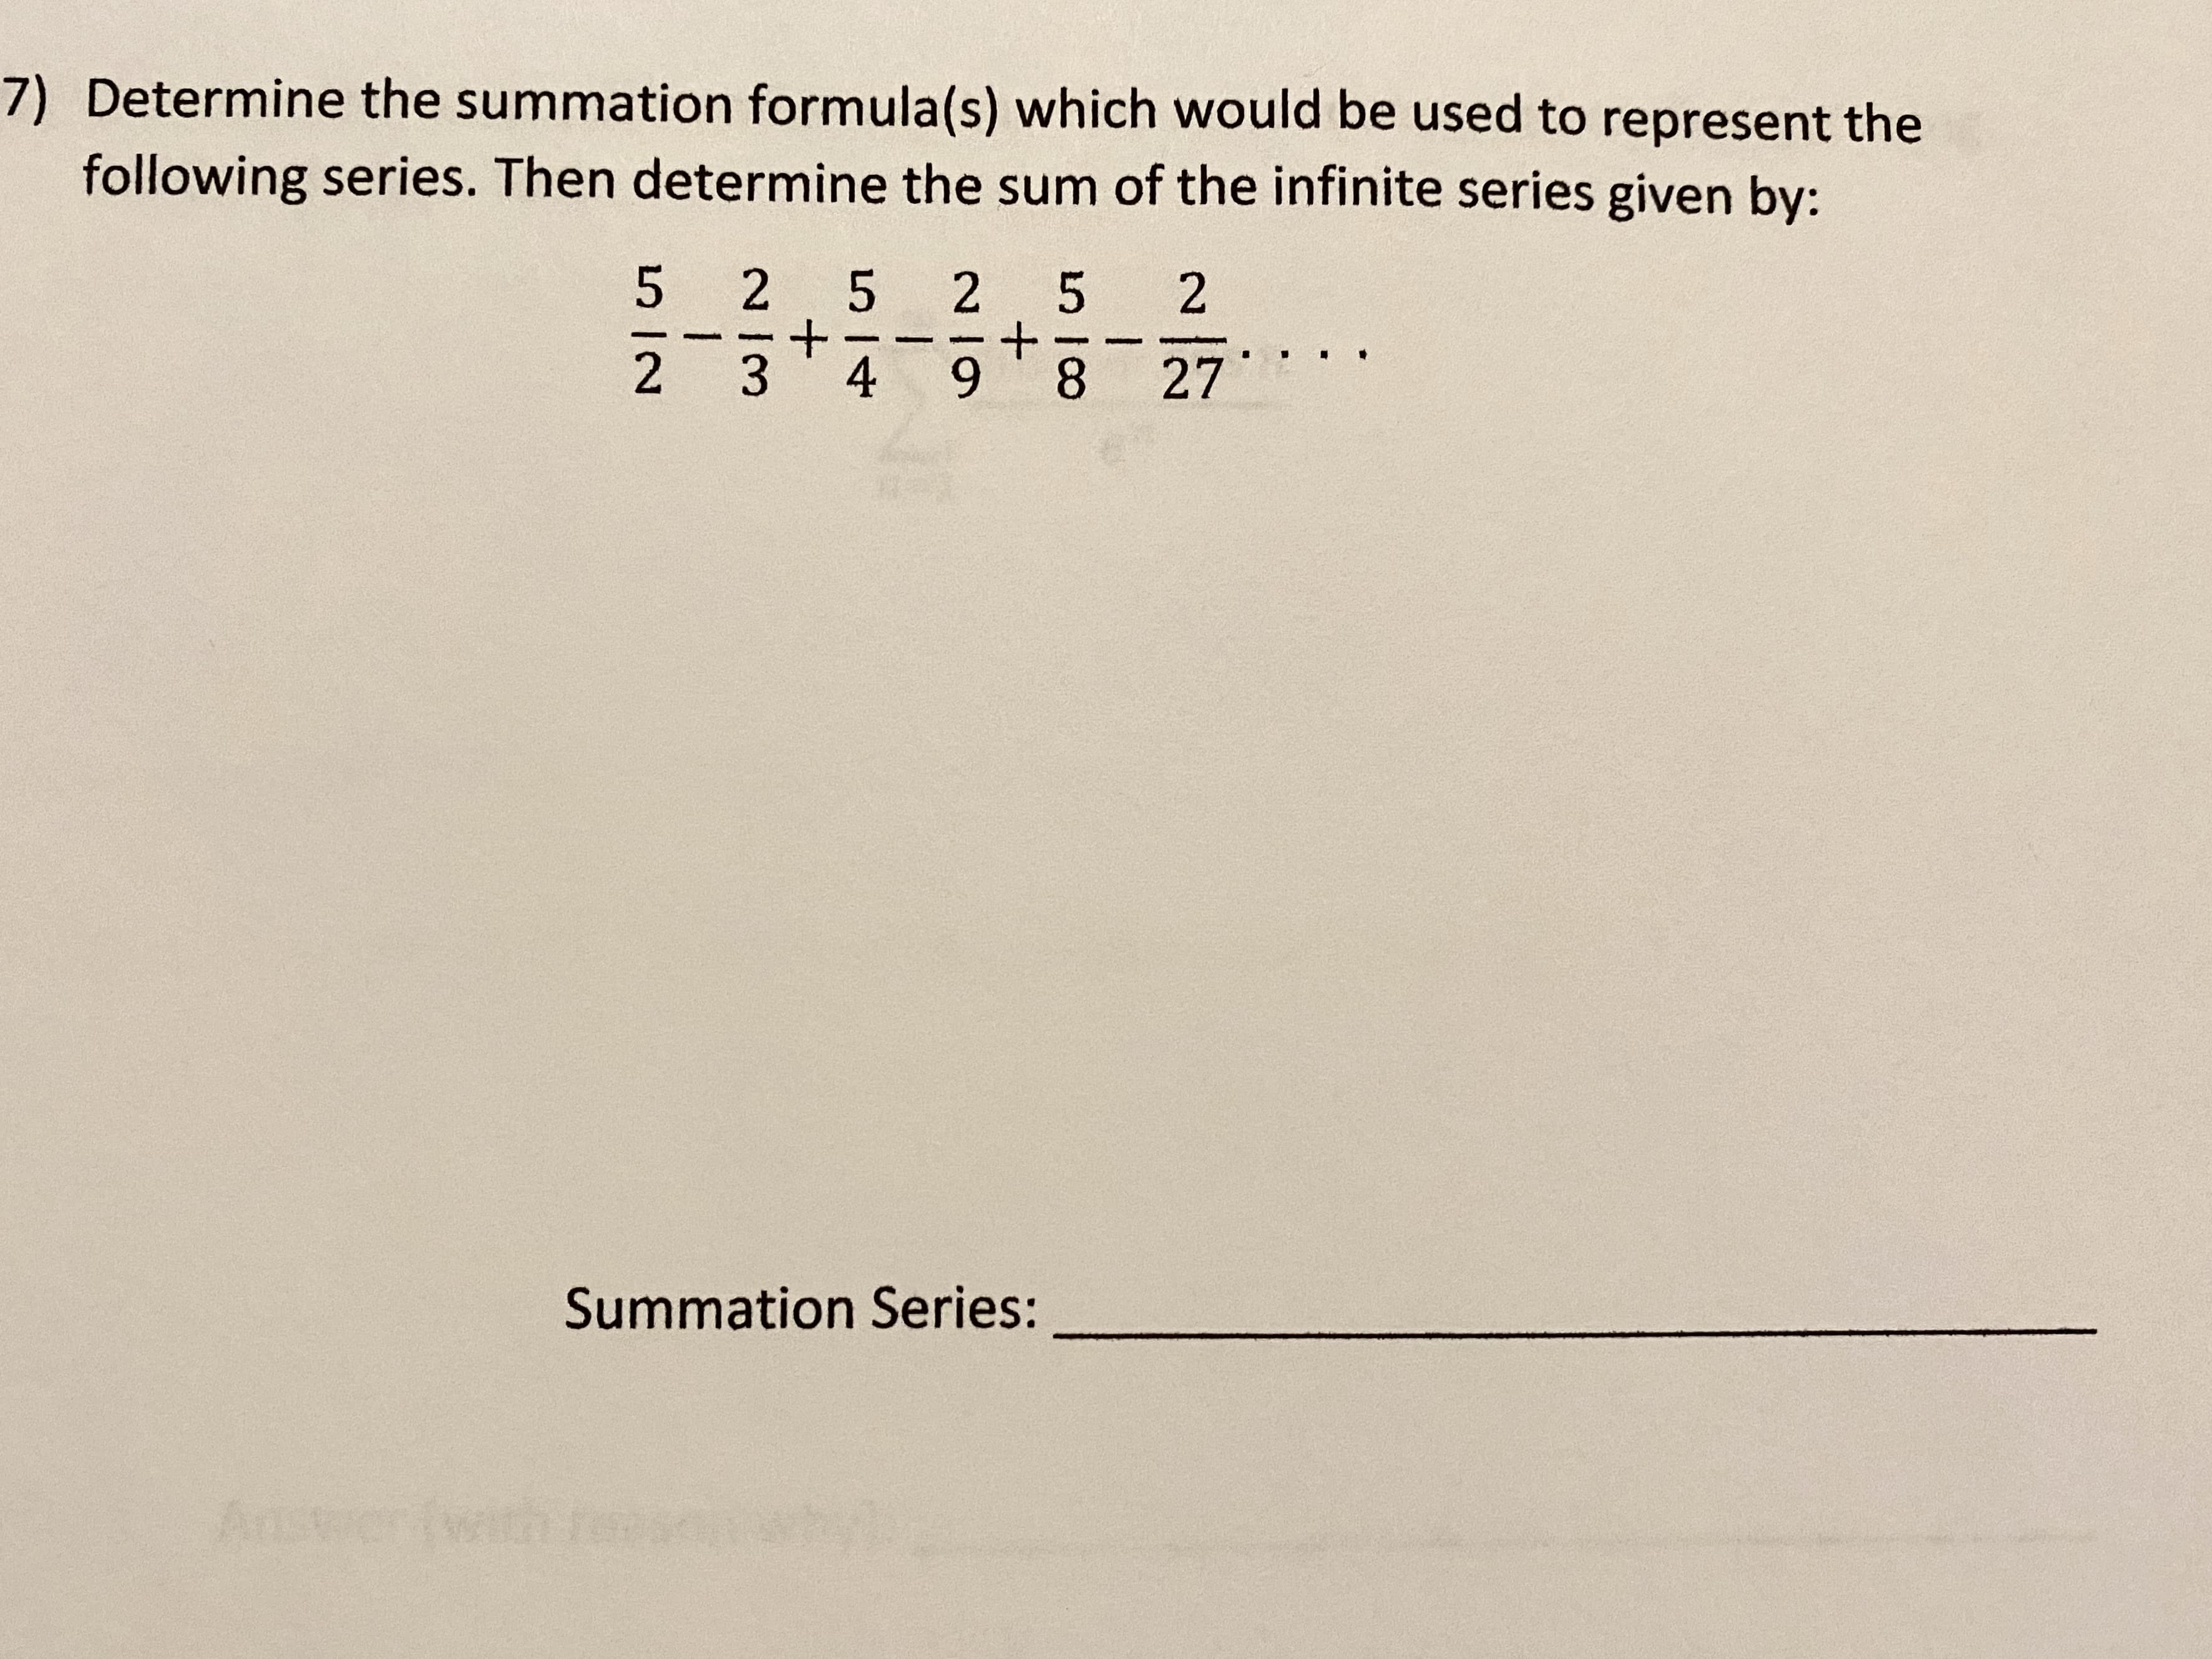 Determine the summation formula(s) which would be used to represent the
following series. Then determine the sum of the infinite series given by:
5 2 5 2 5
+.
9.
2 3
4
8.
27
